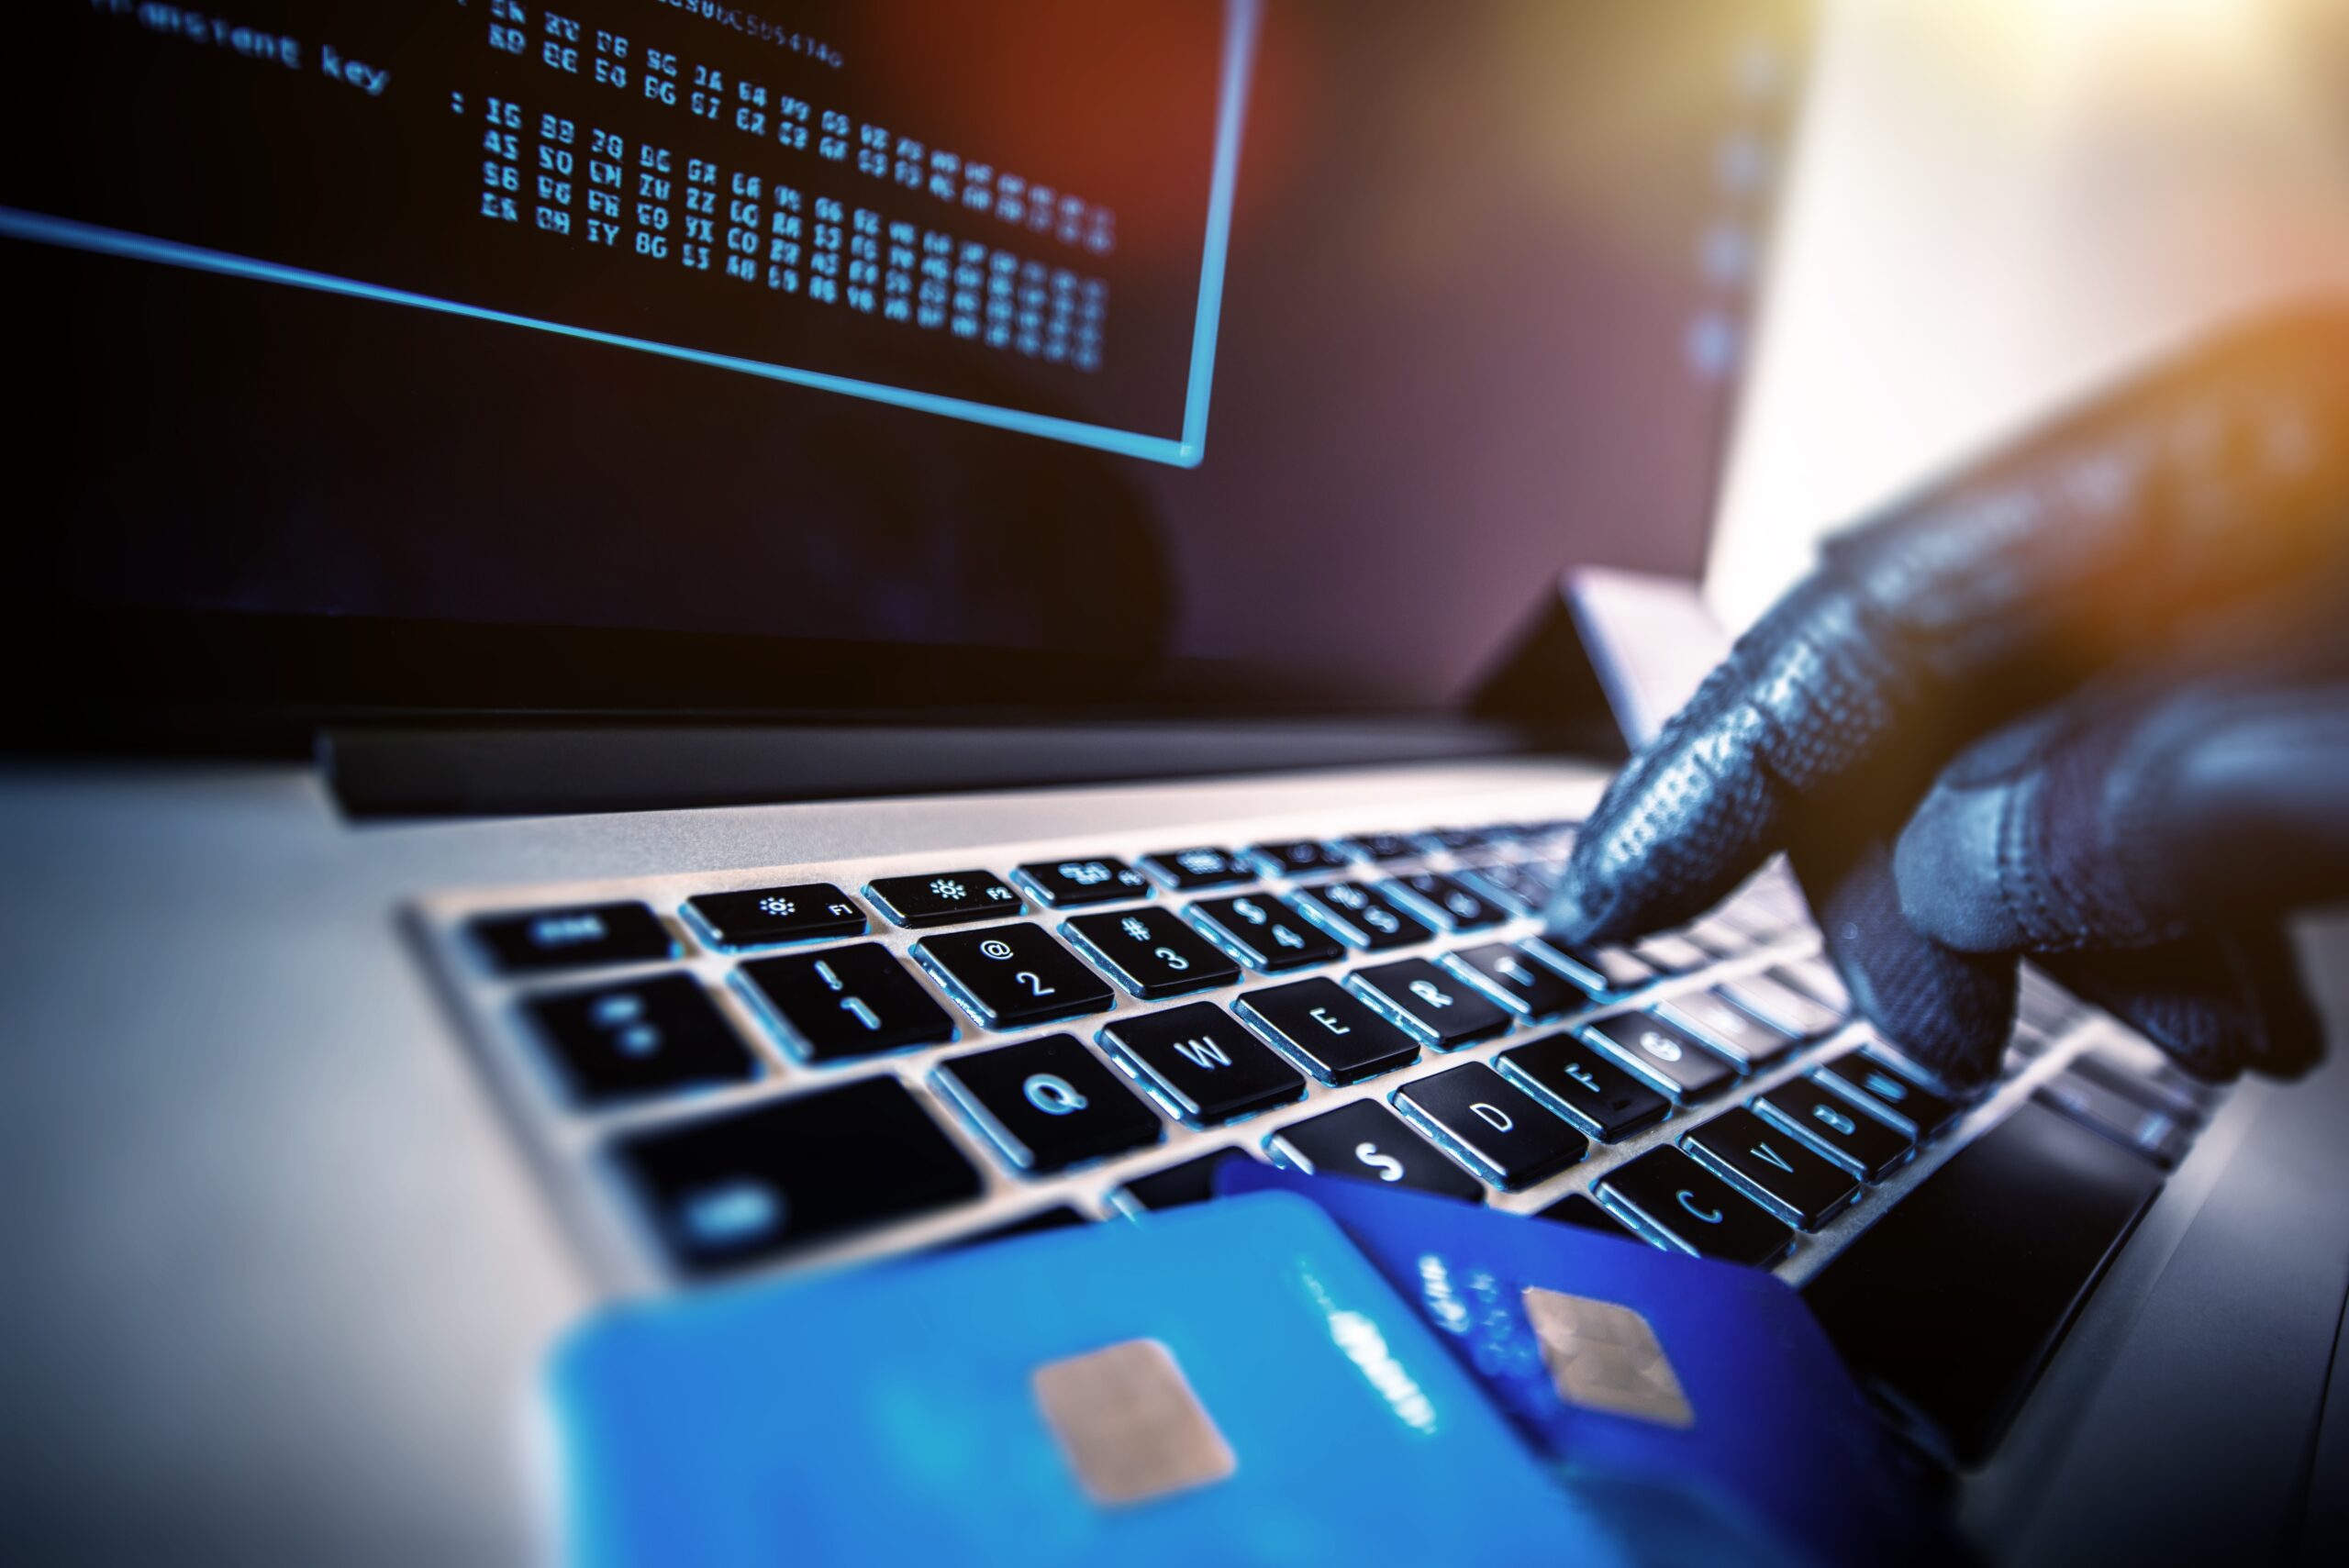 Electronic payment fraud is on the rise